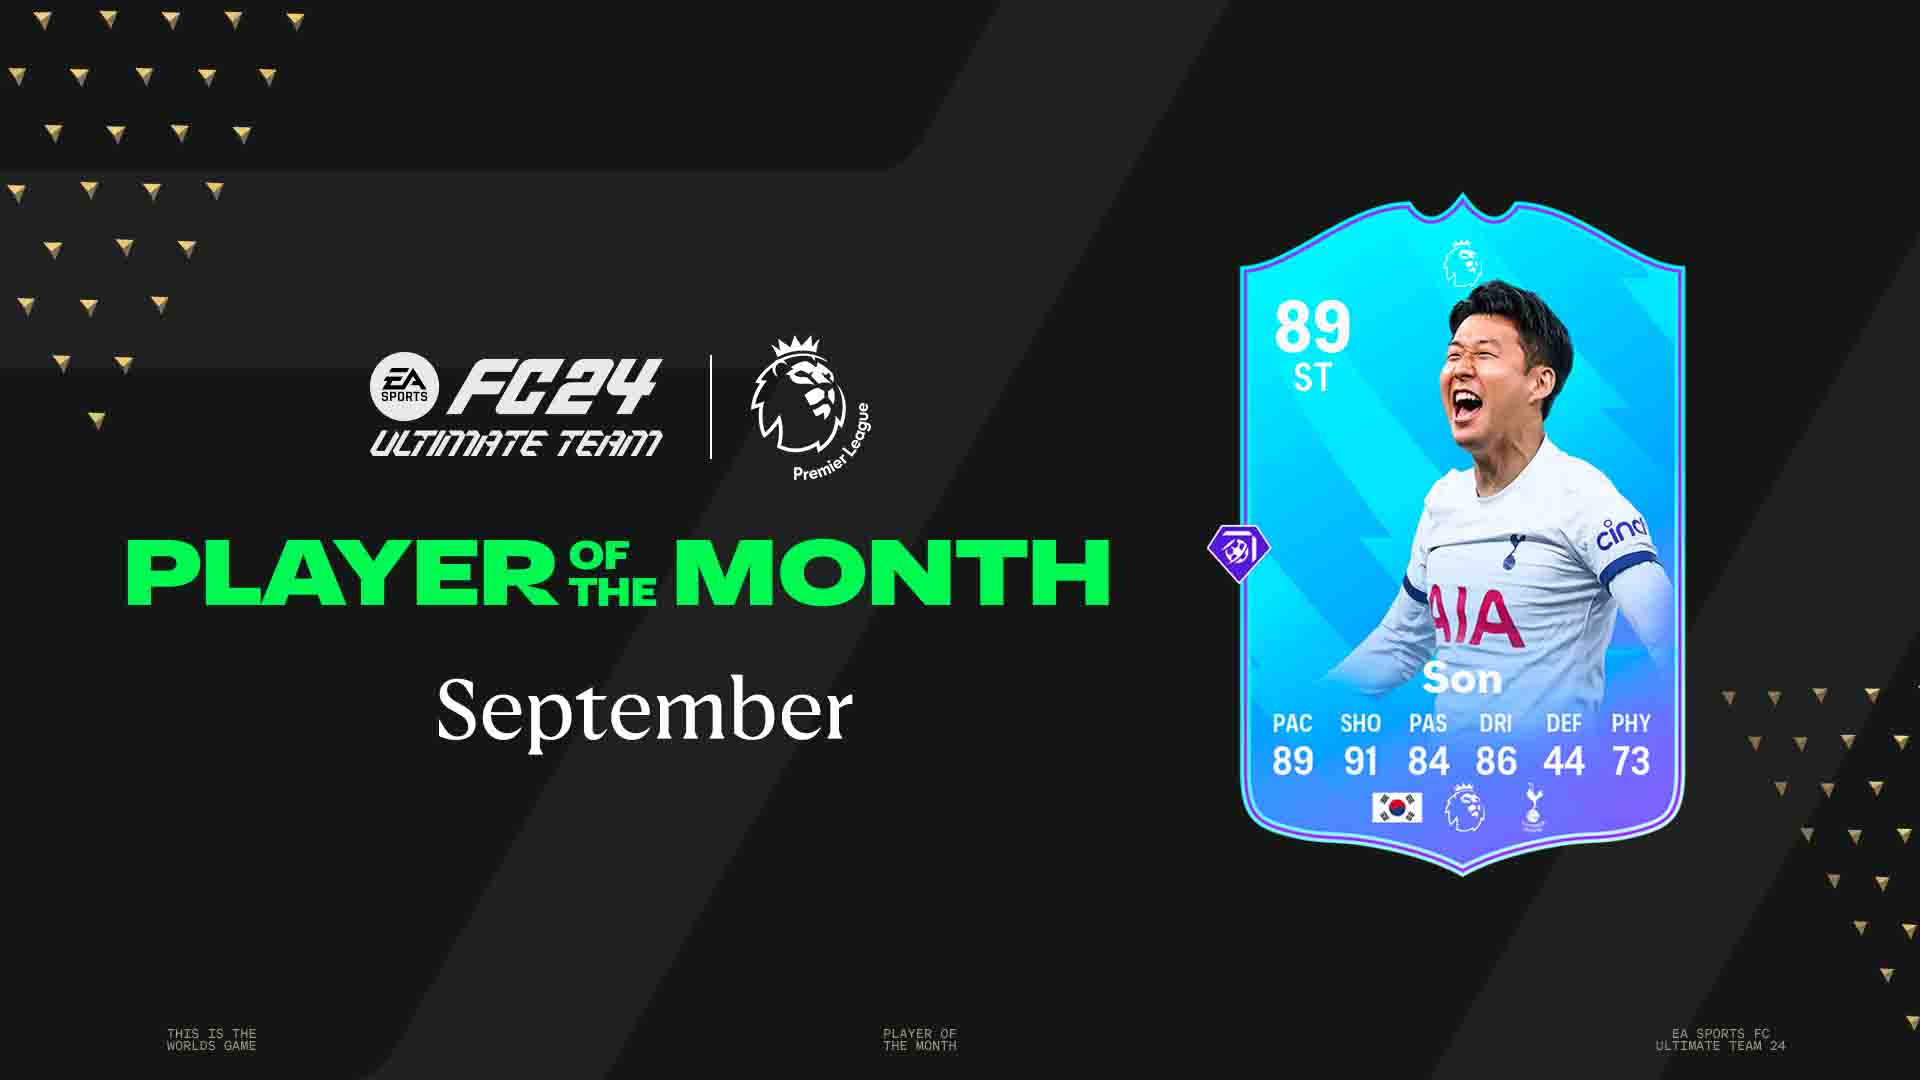 Prime Gaming February FIFA 23 pack features Mo Salah for the